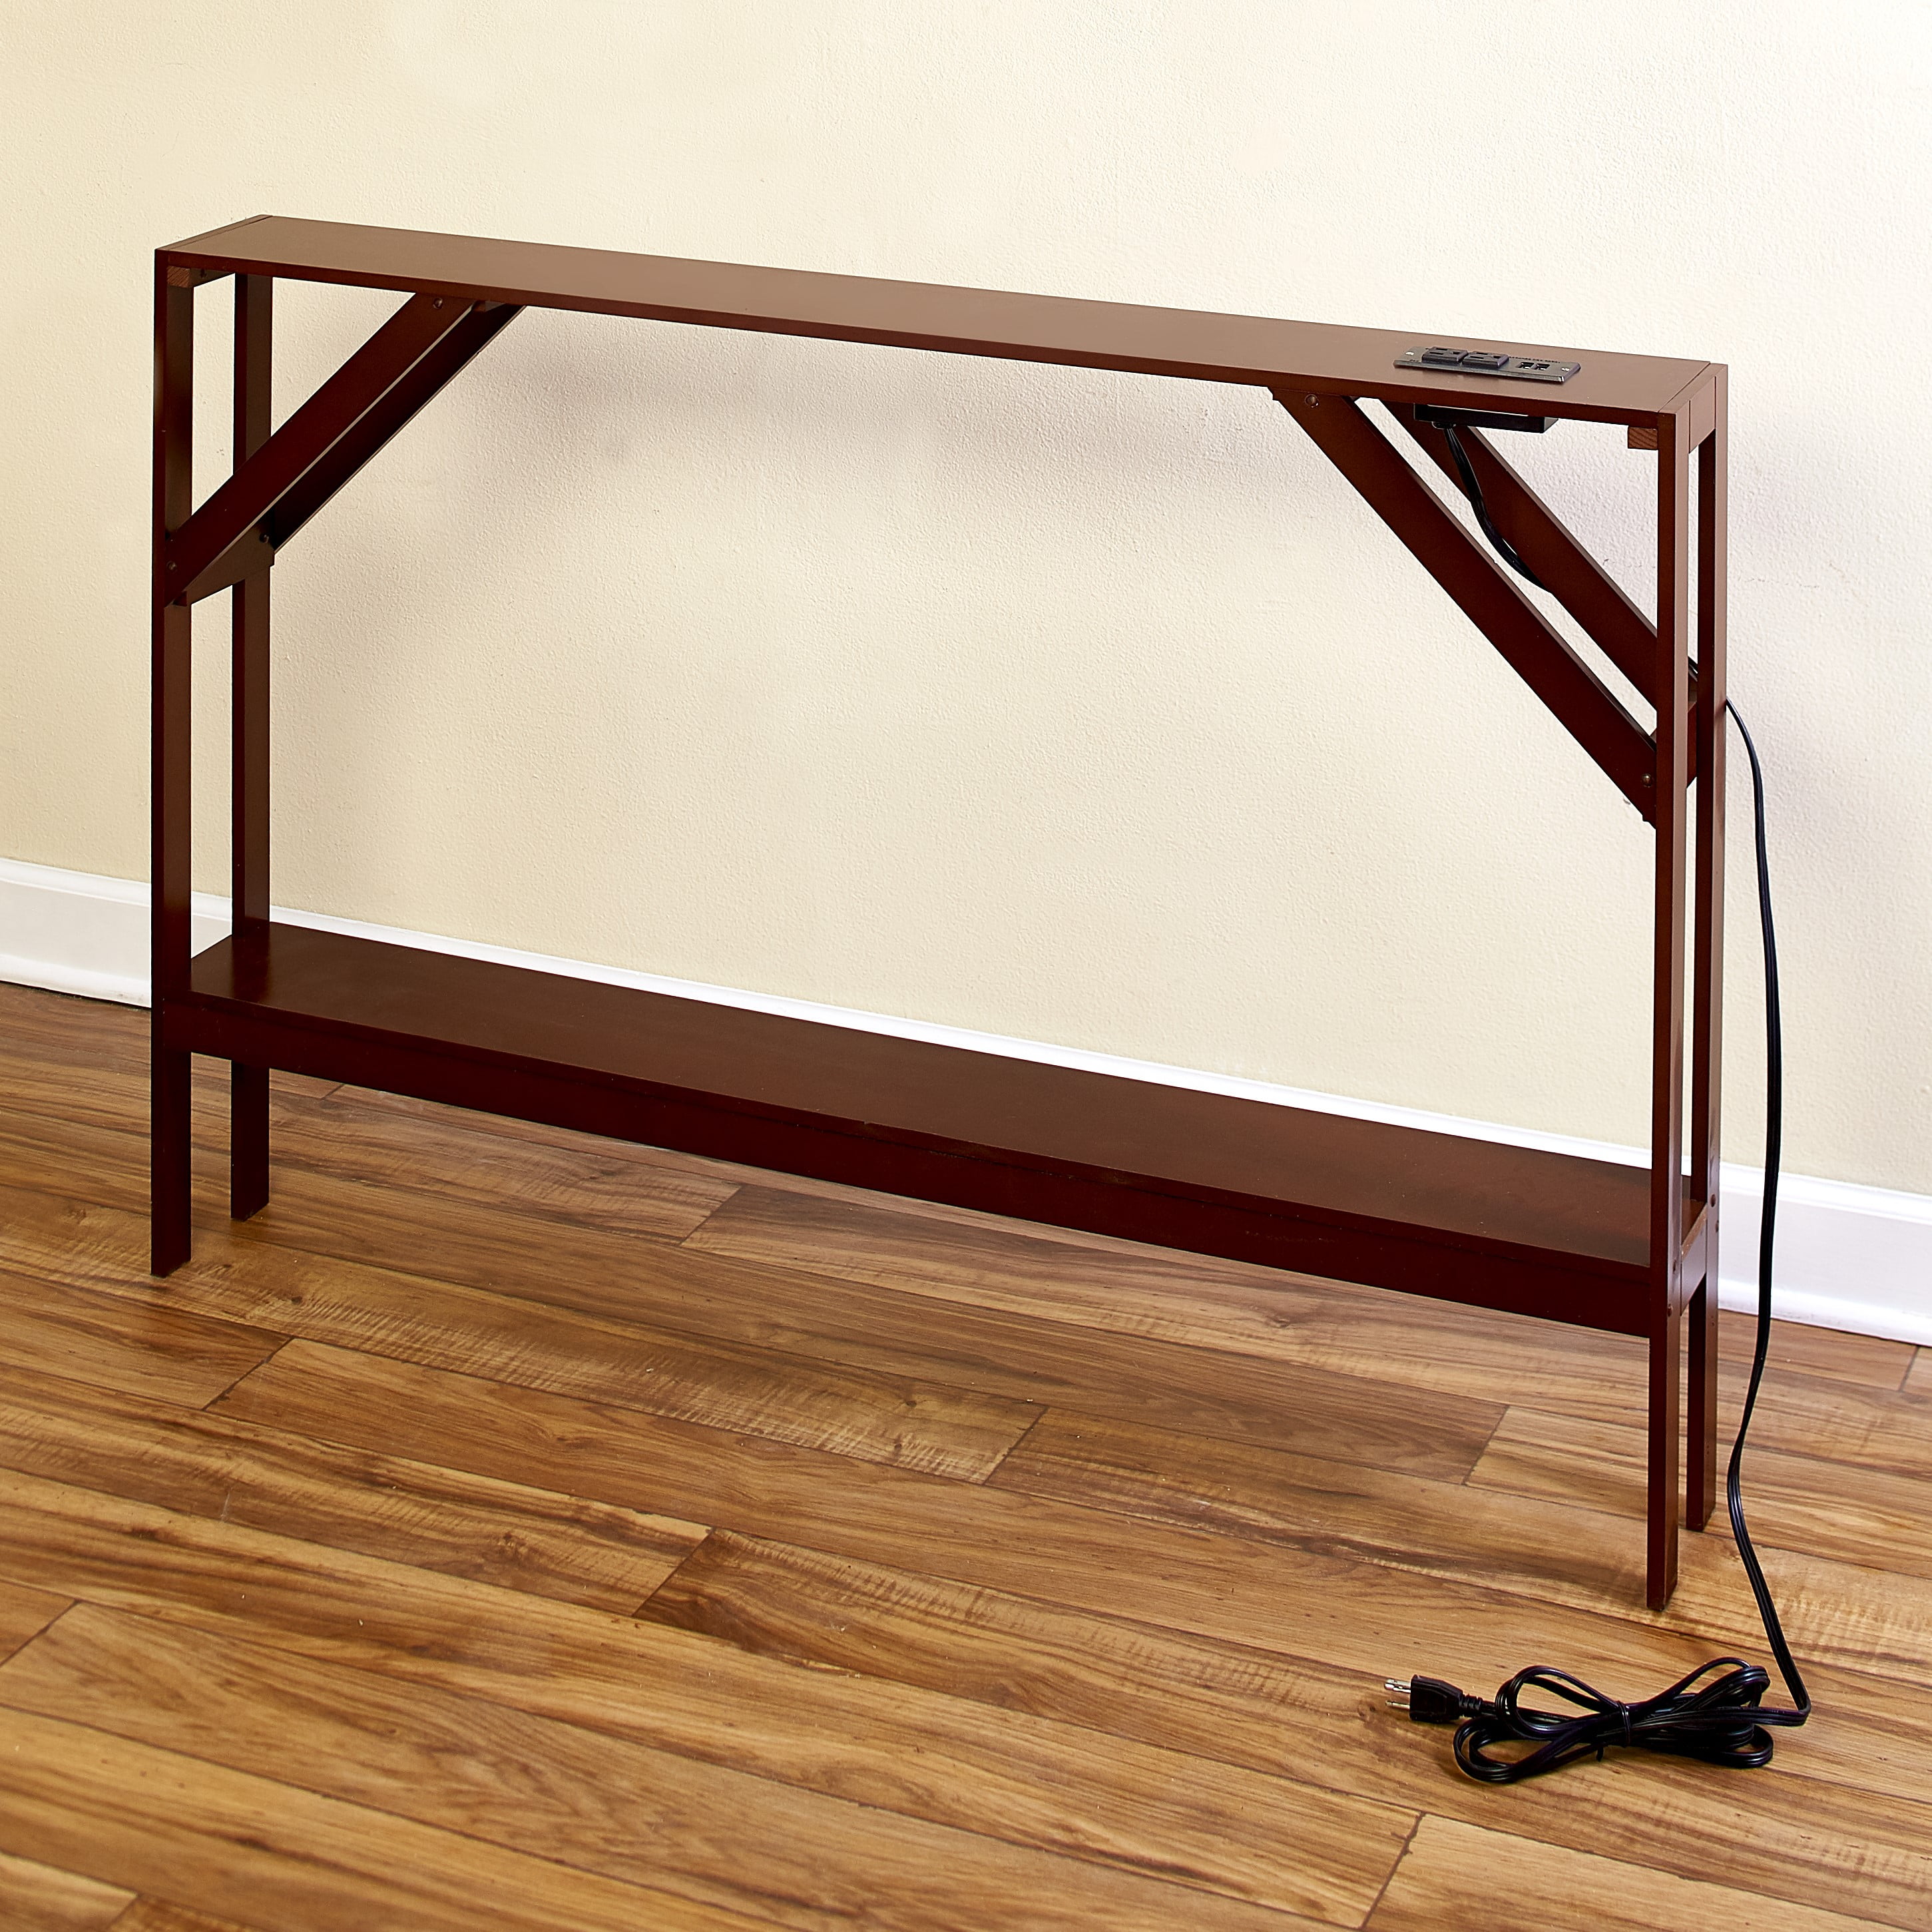 Skinny Sofa Table with Outlet - Modern Console Table with Black Finish -  Walmart.com